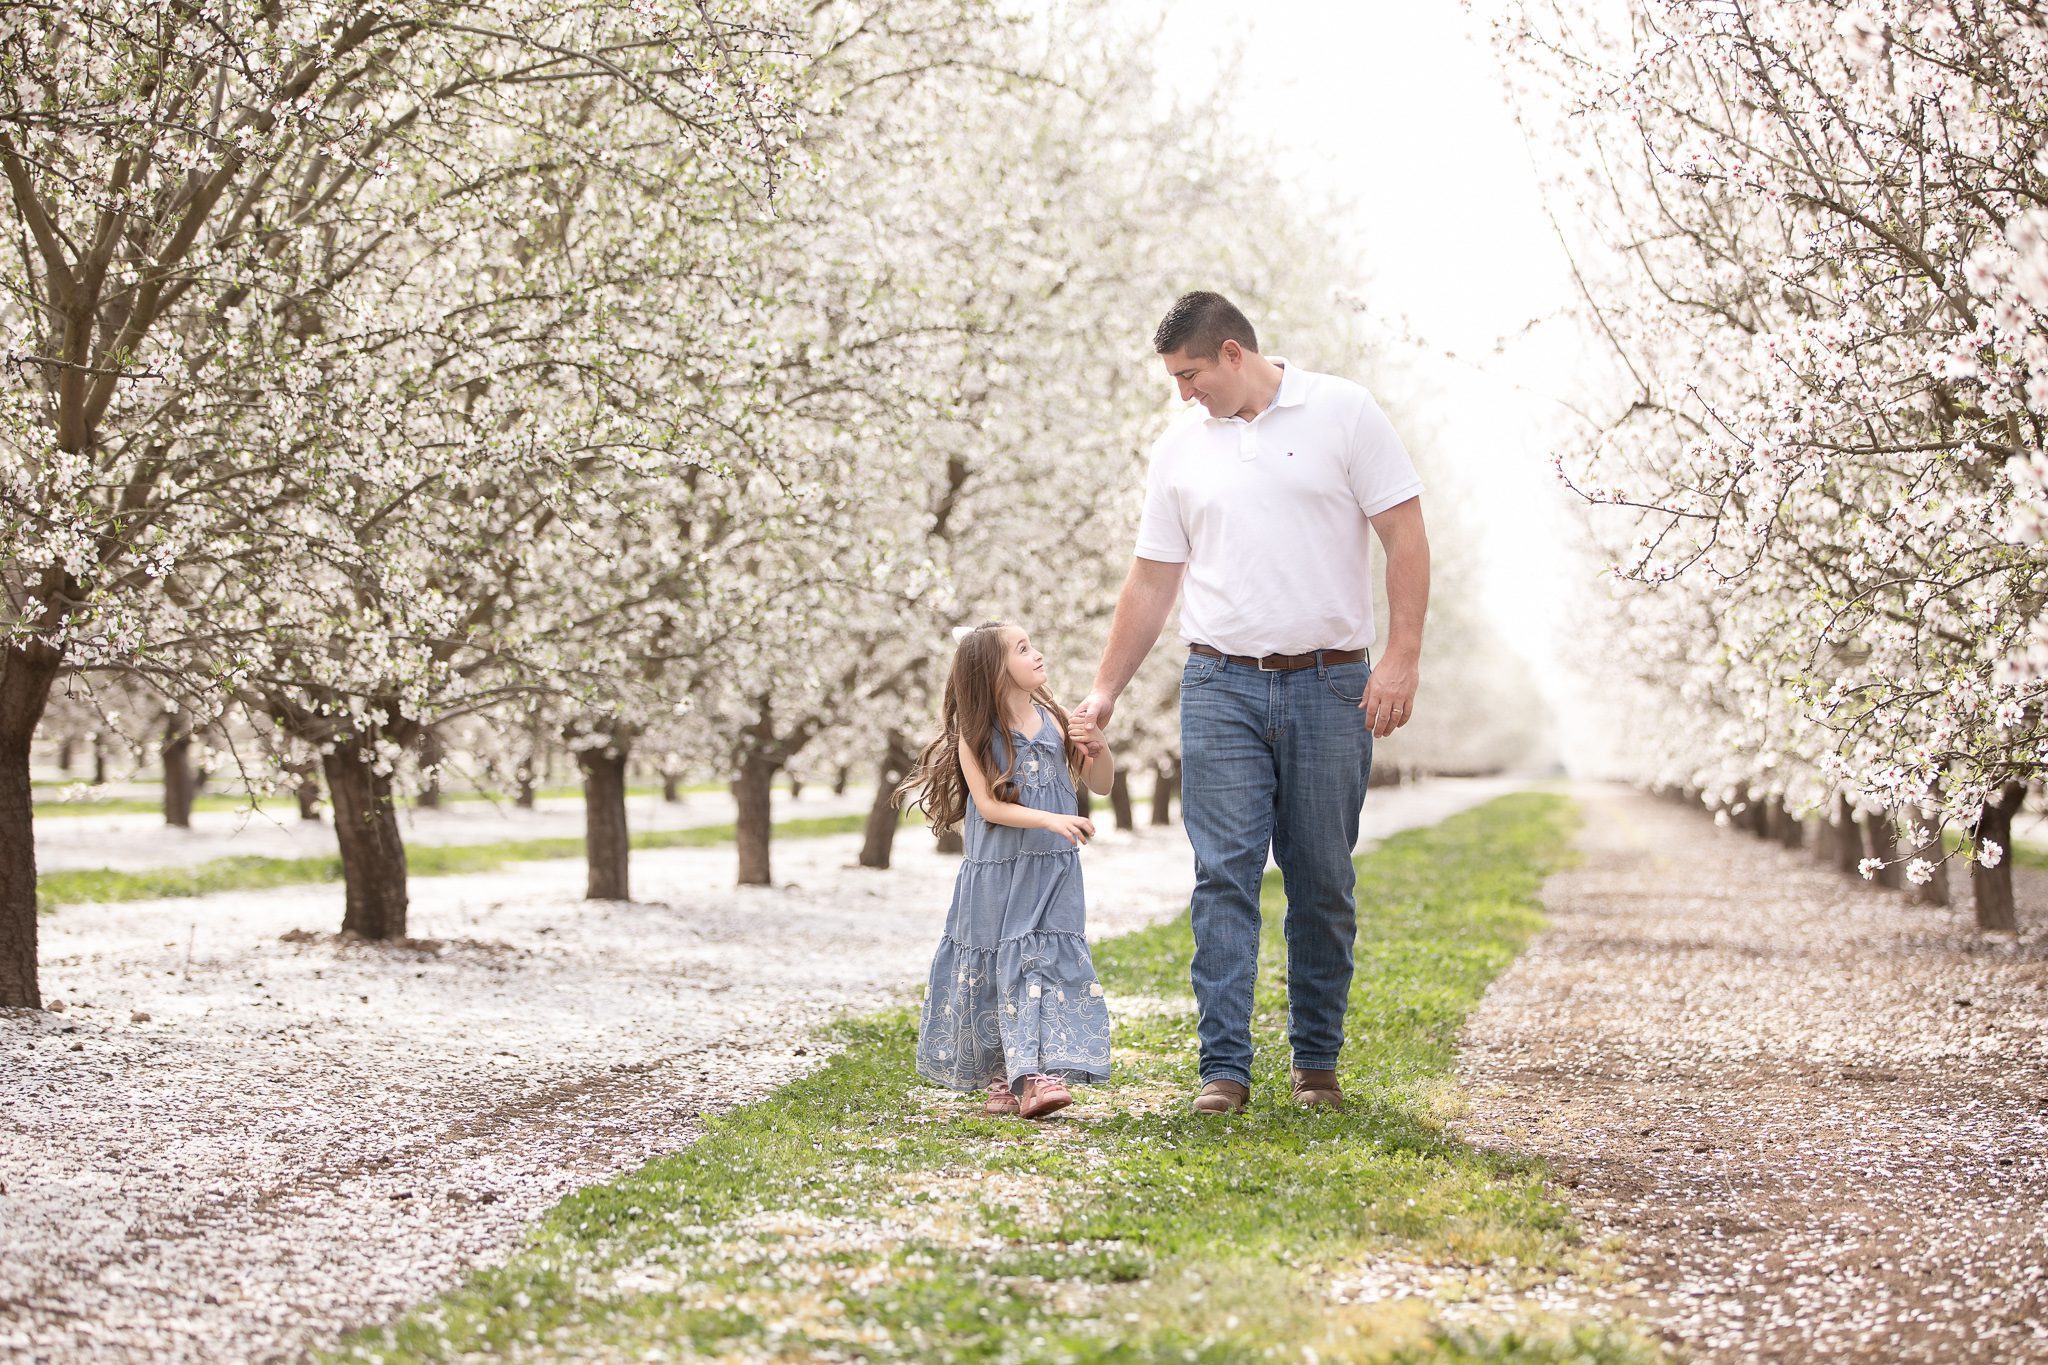 father and daughter walking in the blossom trails, holding hands, looking at each other, smiling, daddy's girl